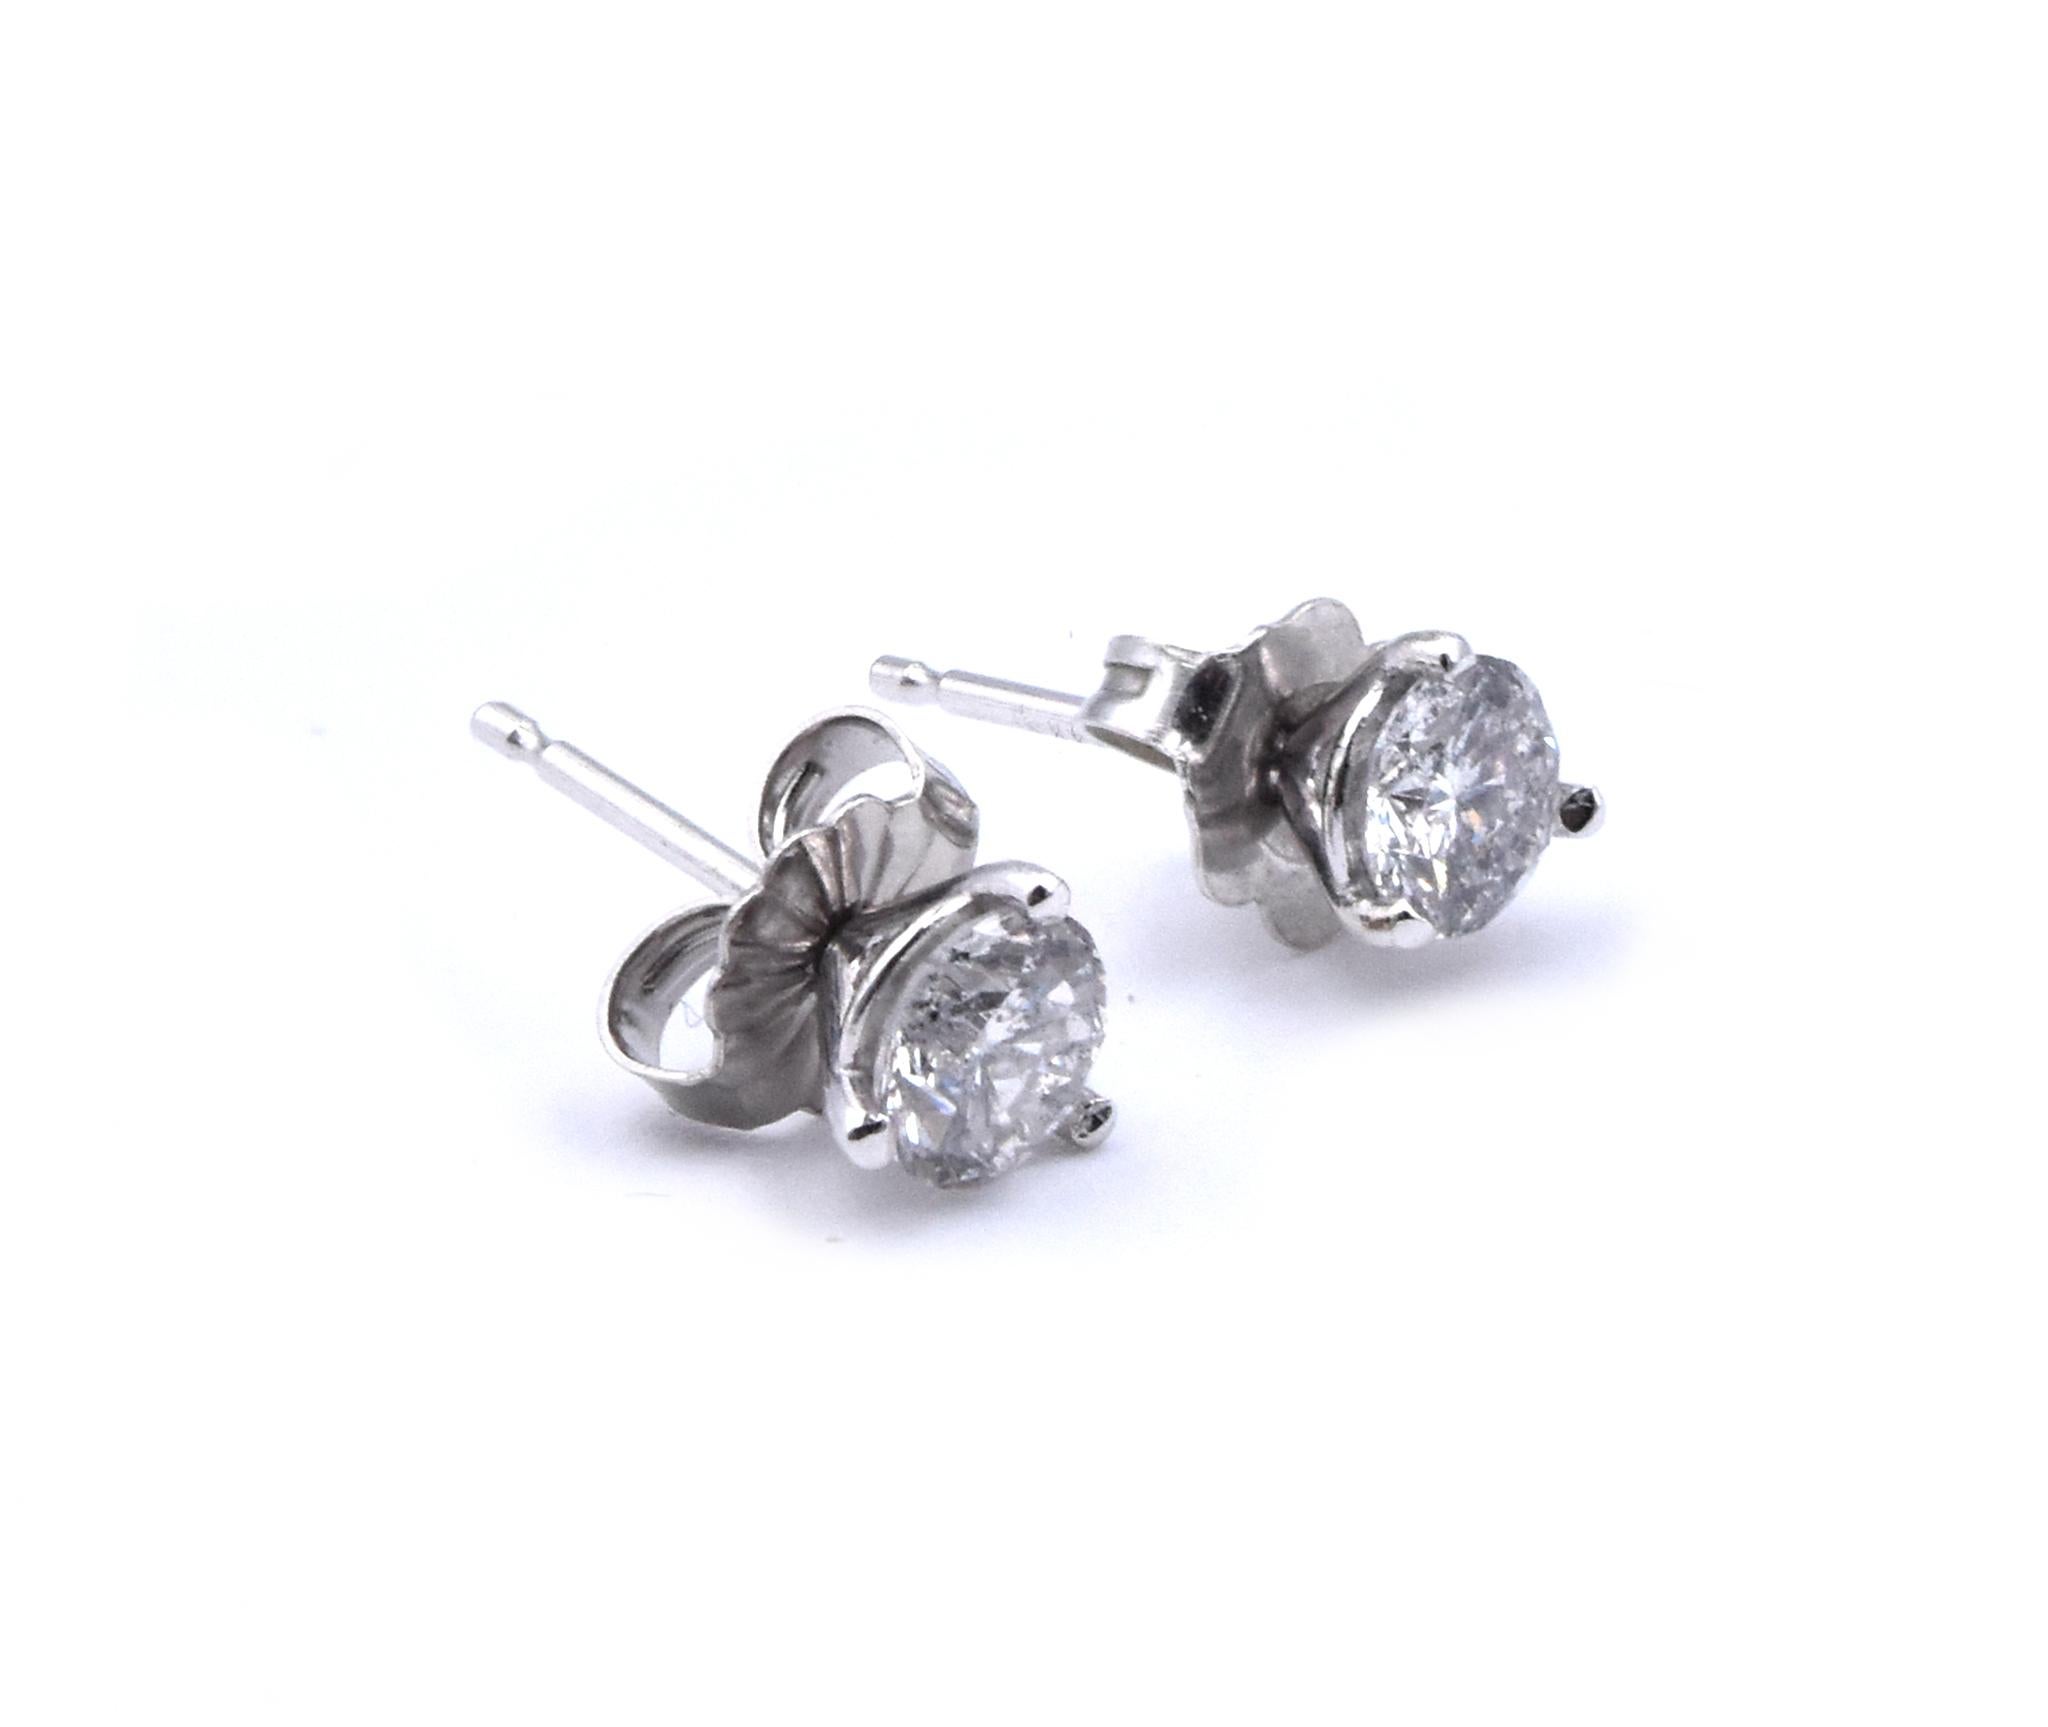 Material: 14k white gold
Diamond: 2 round brilliant cut = .80cttw
Color: G
Clarity: I1
Dimensions: earrings measure approximately 5.06mm in diameter
Fastenings: post with friction backs
Weight:  .55 grams
